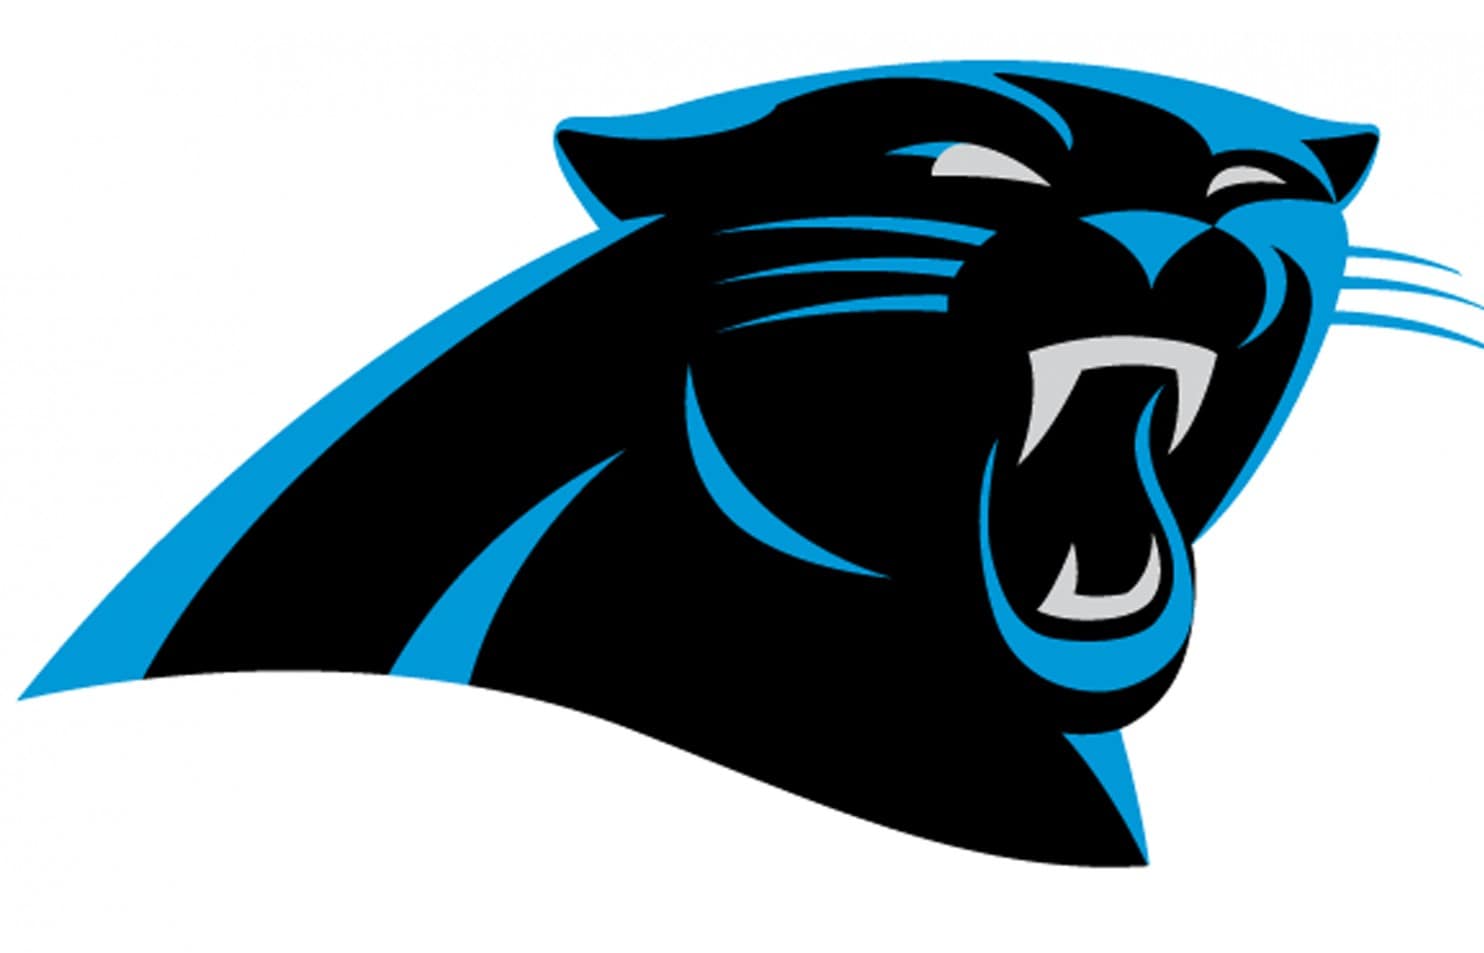 NFL Panthers Logo - Carolina Panthers unveil 'more aggressive' logo as Nike takes over ...